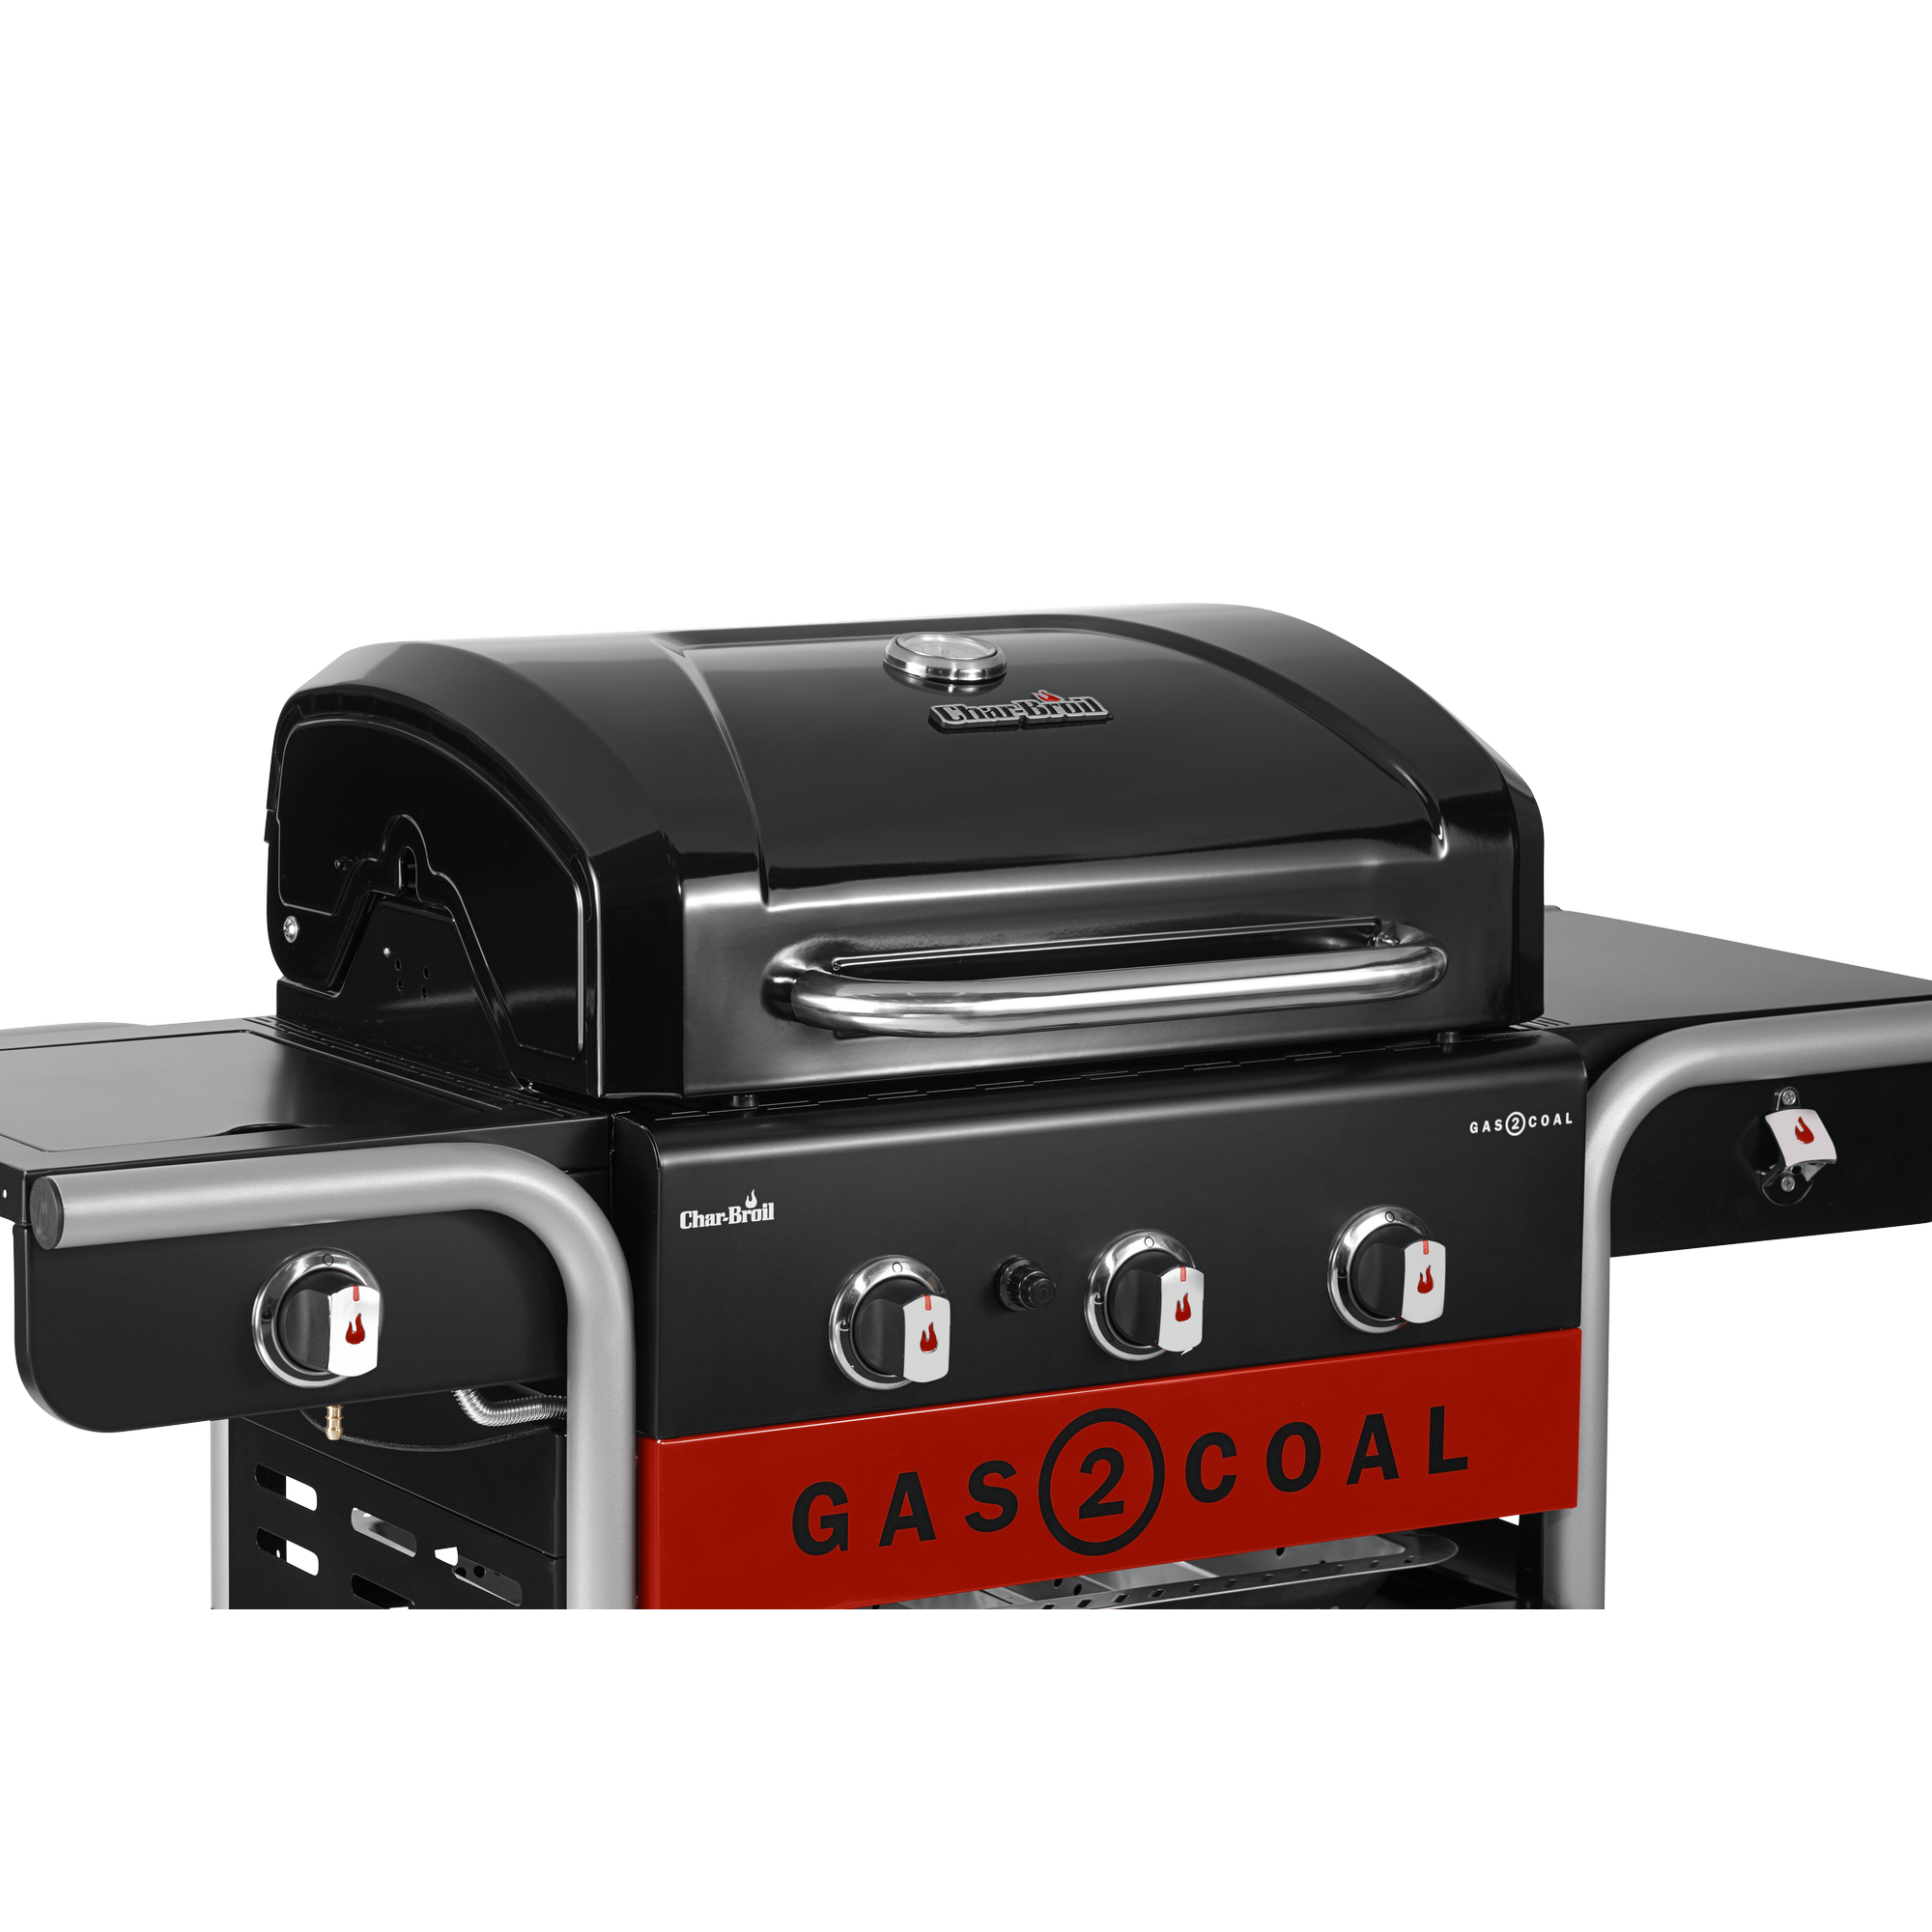 Hybridgrill 'Gas2Coal 2.0 330' mit 3 Brennern + product picture